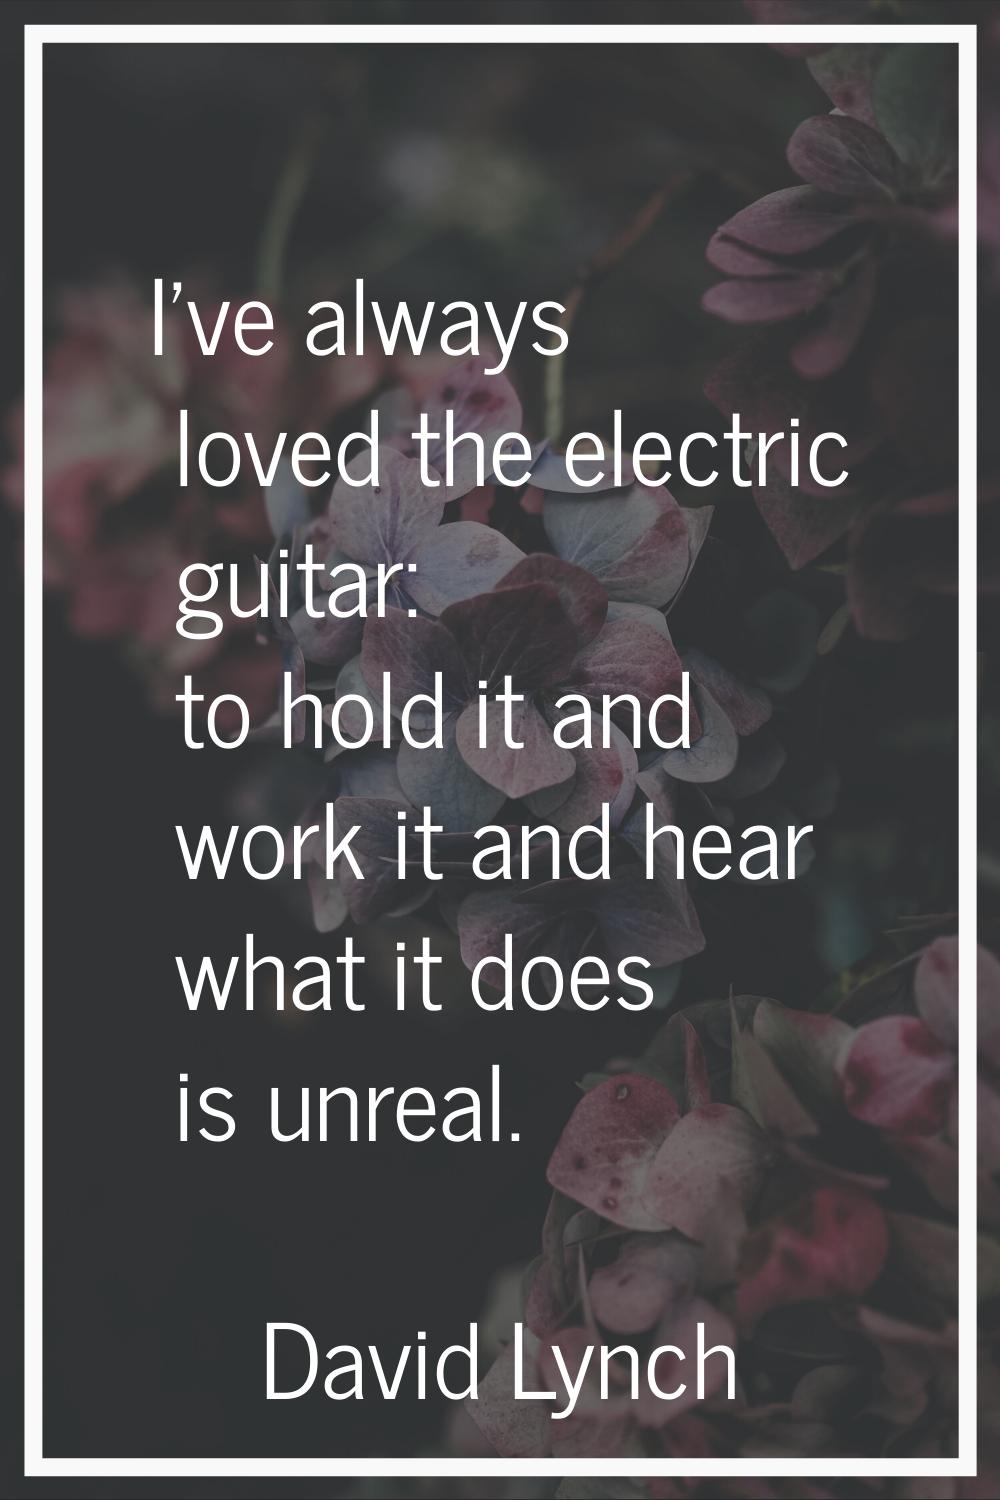 I've always loved the electric guitar: to hold it and work it and hear what it does is unreal.